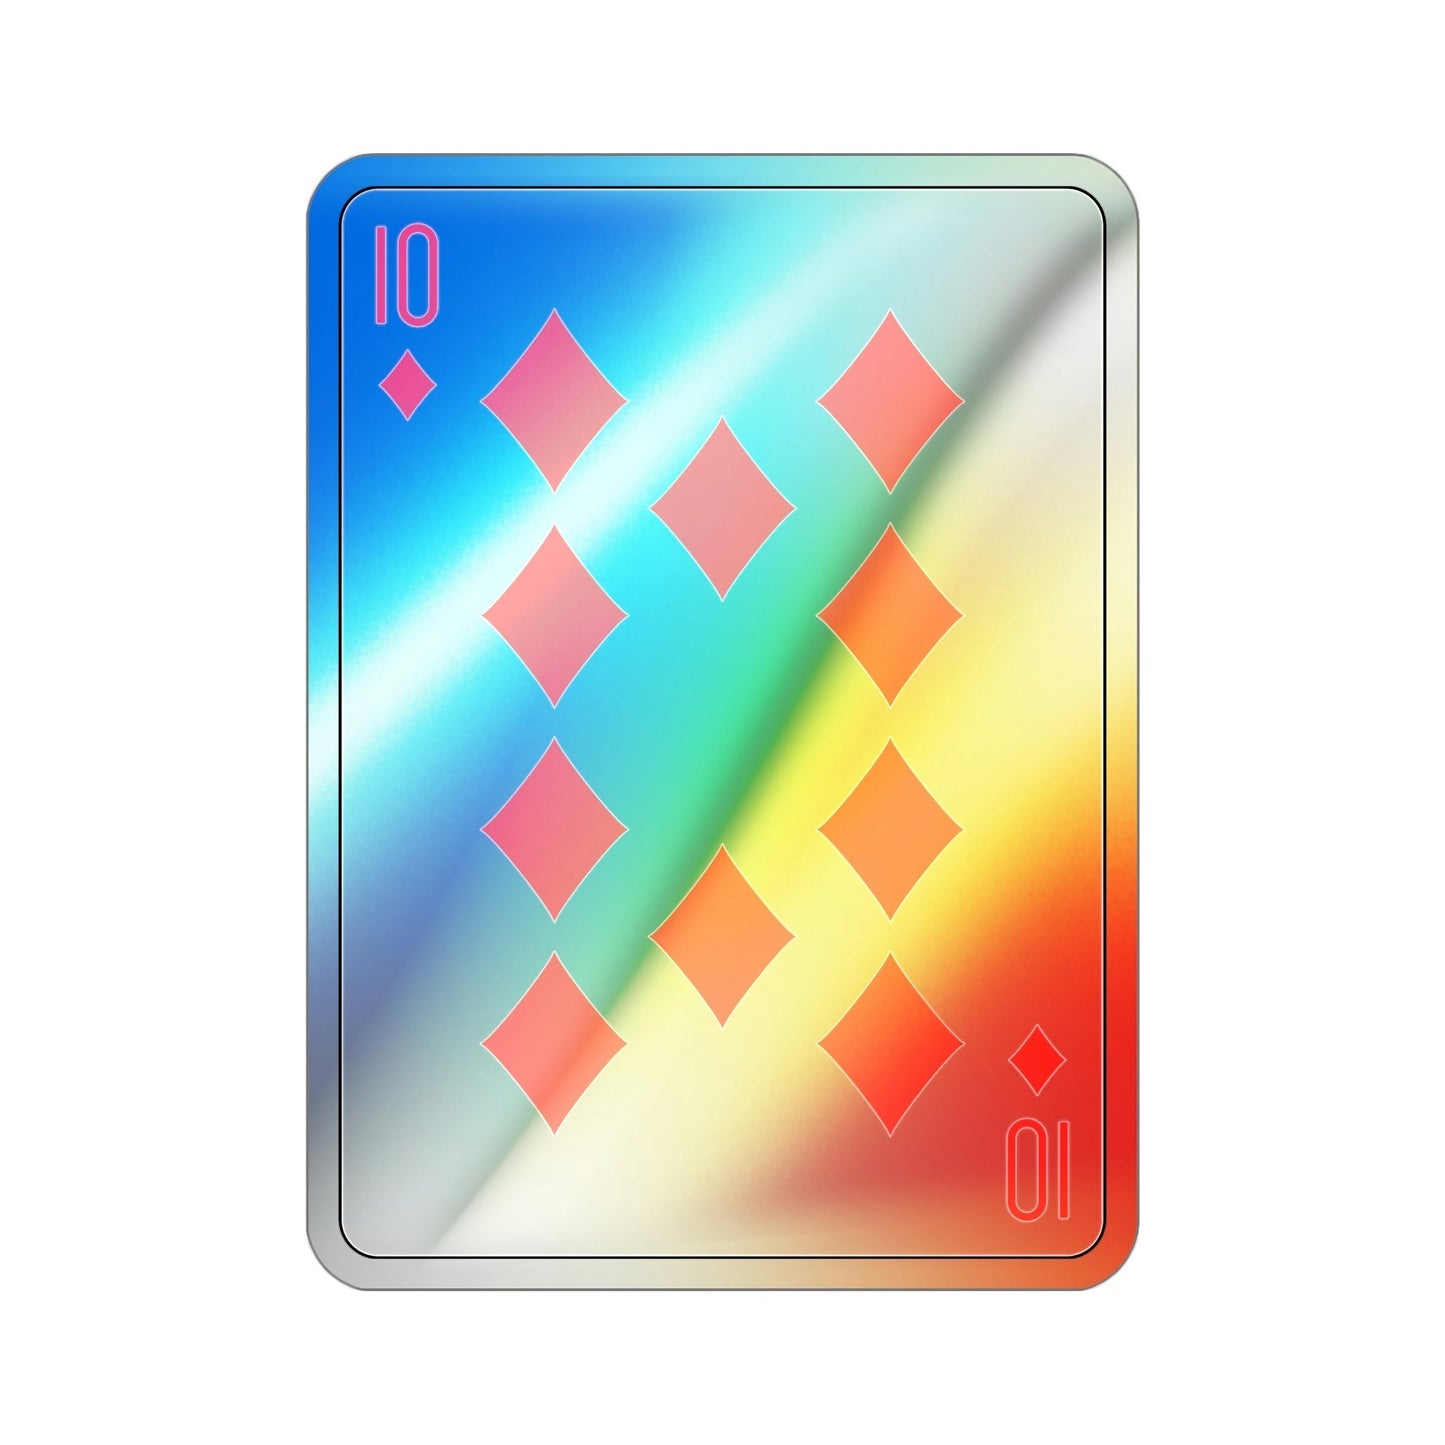 10 of Diamonds Playing Card Holographic STICKER Die-Cut Vinyl Decal-4 Inch-The Sticker Space